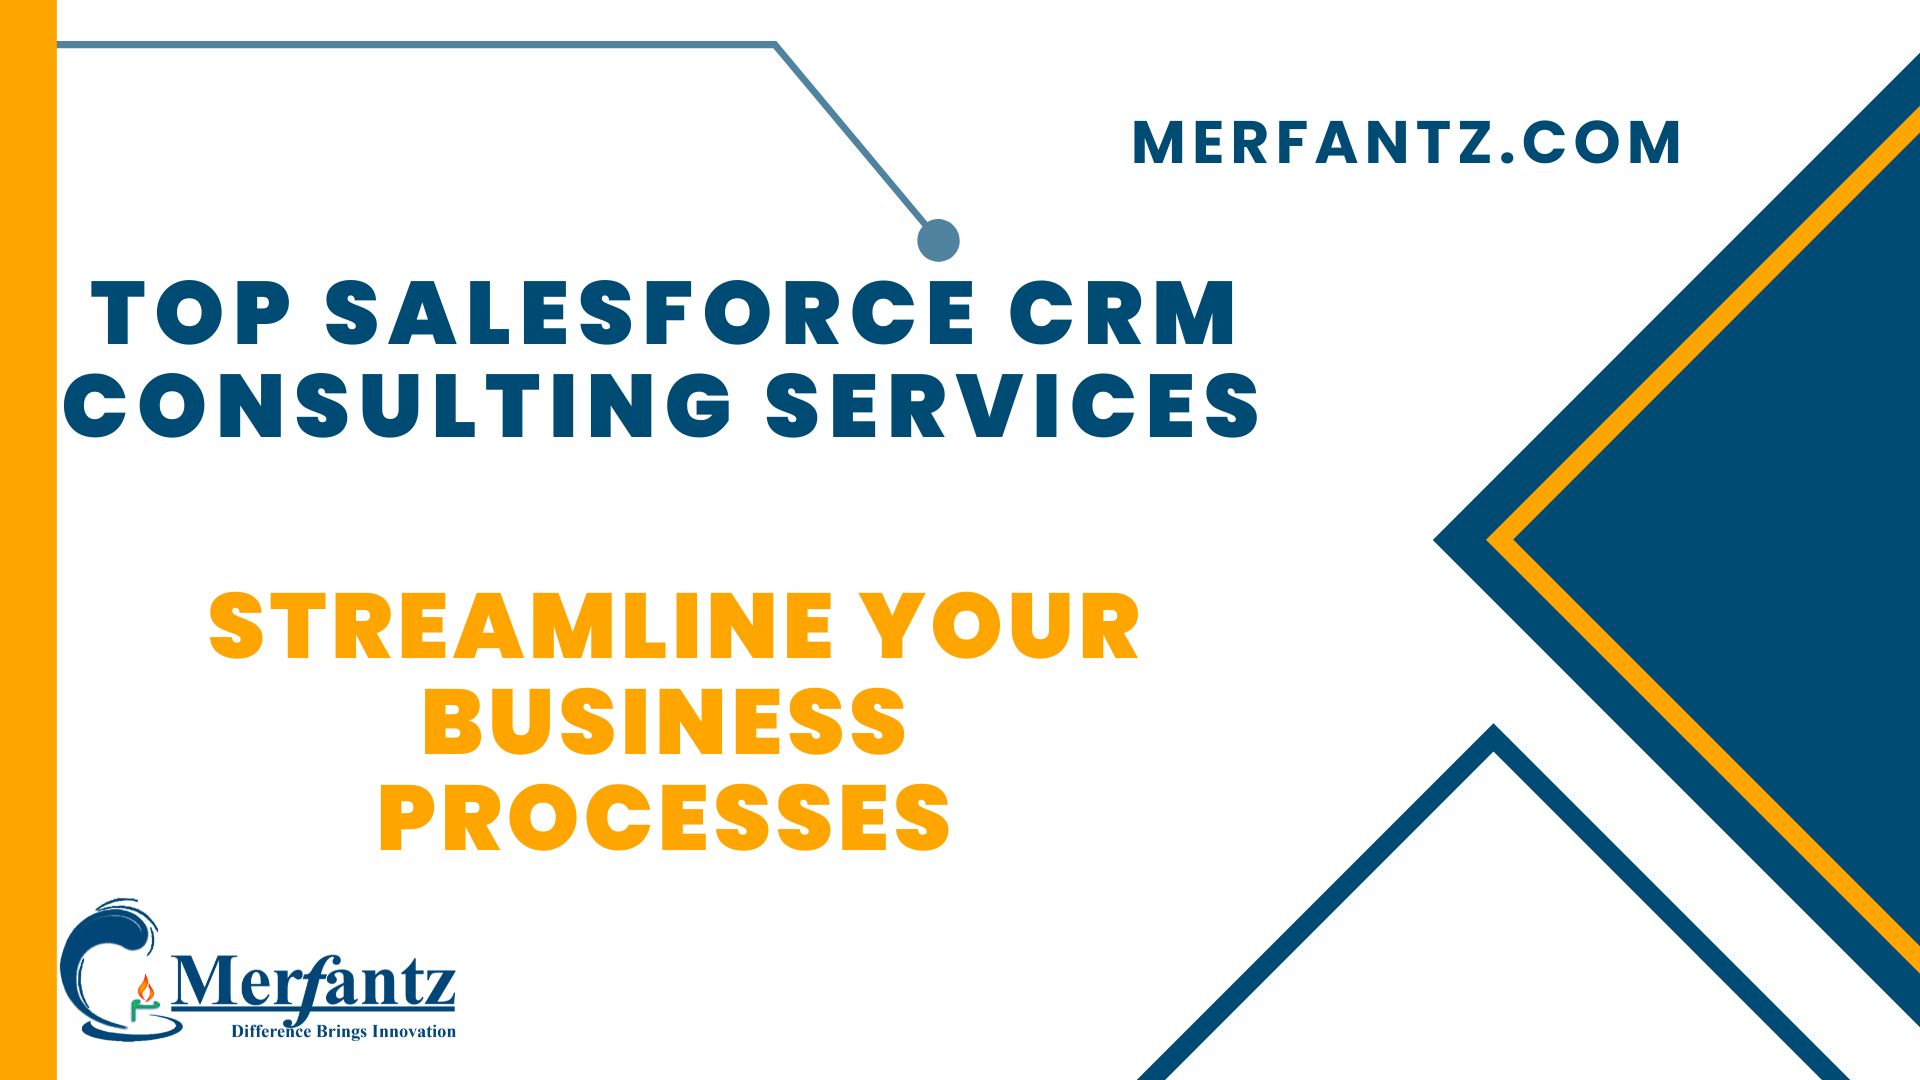 Top Salesforce CRM Consulting Services Merfantz Technologies - Streamline Your Business Processes